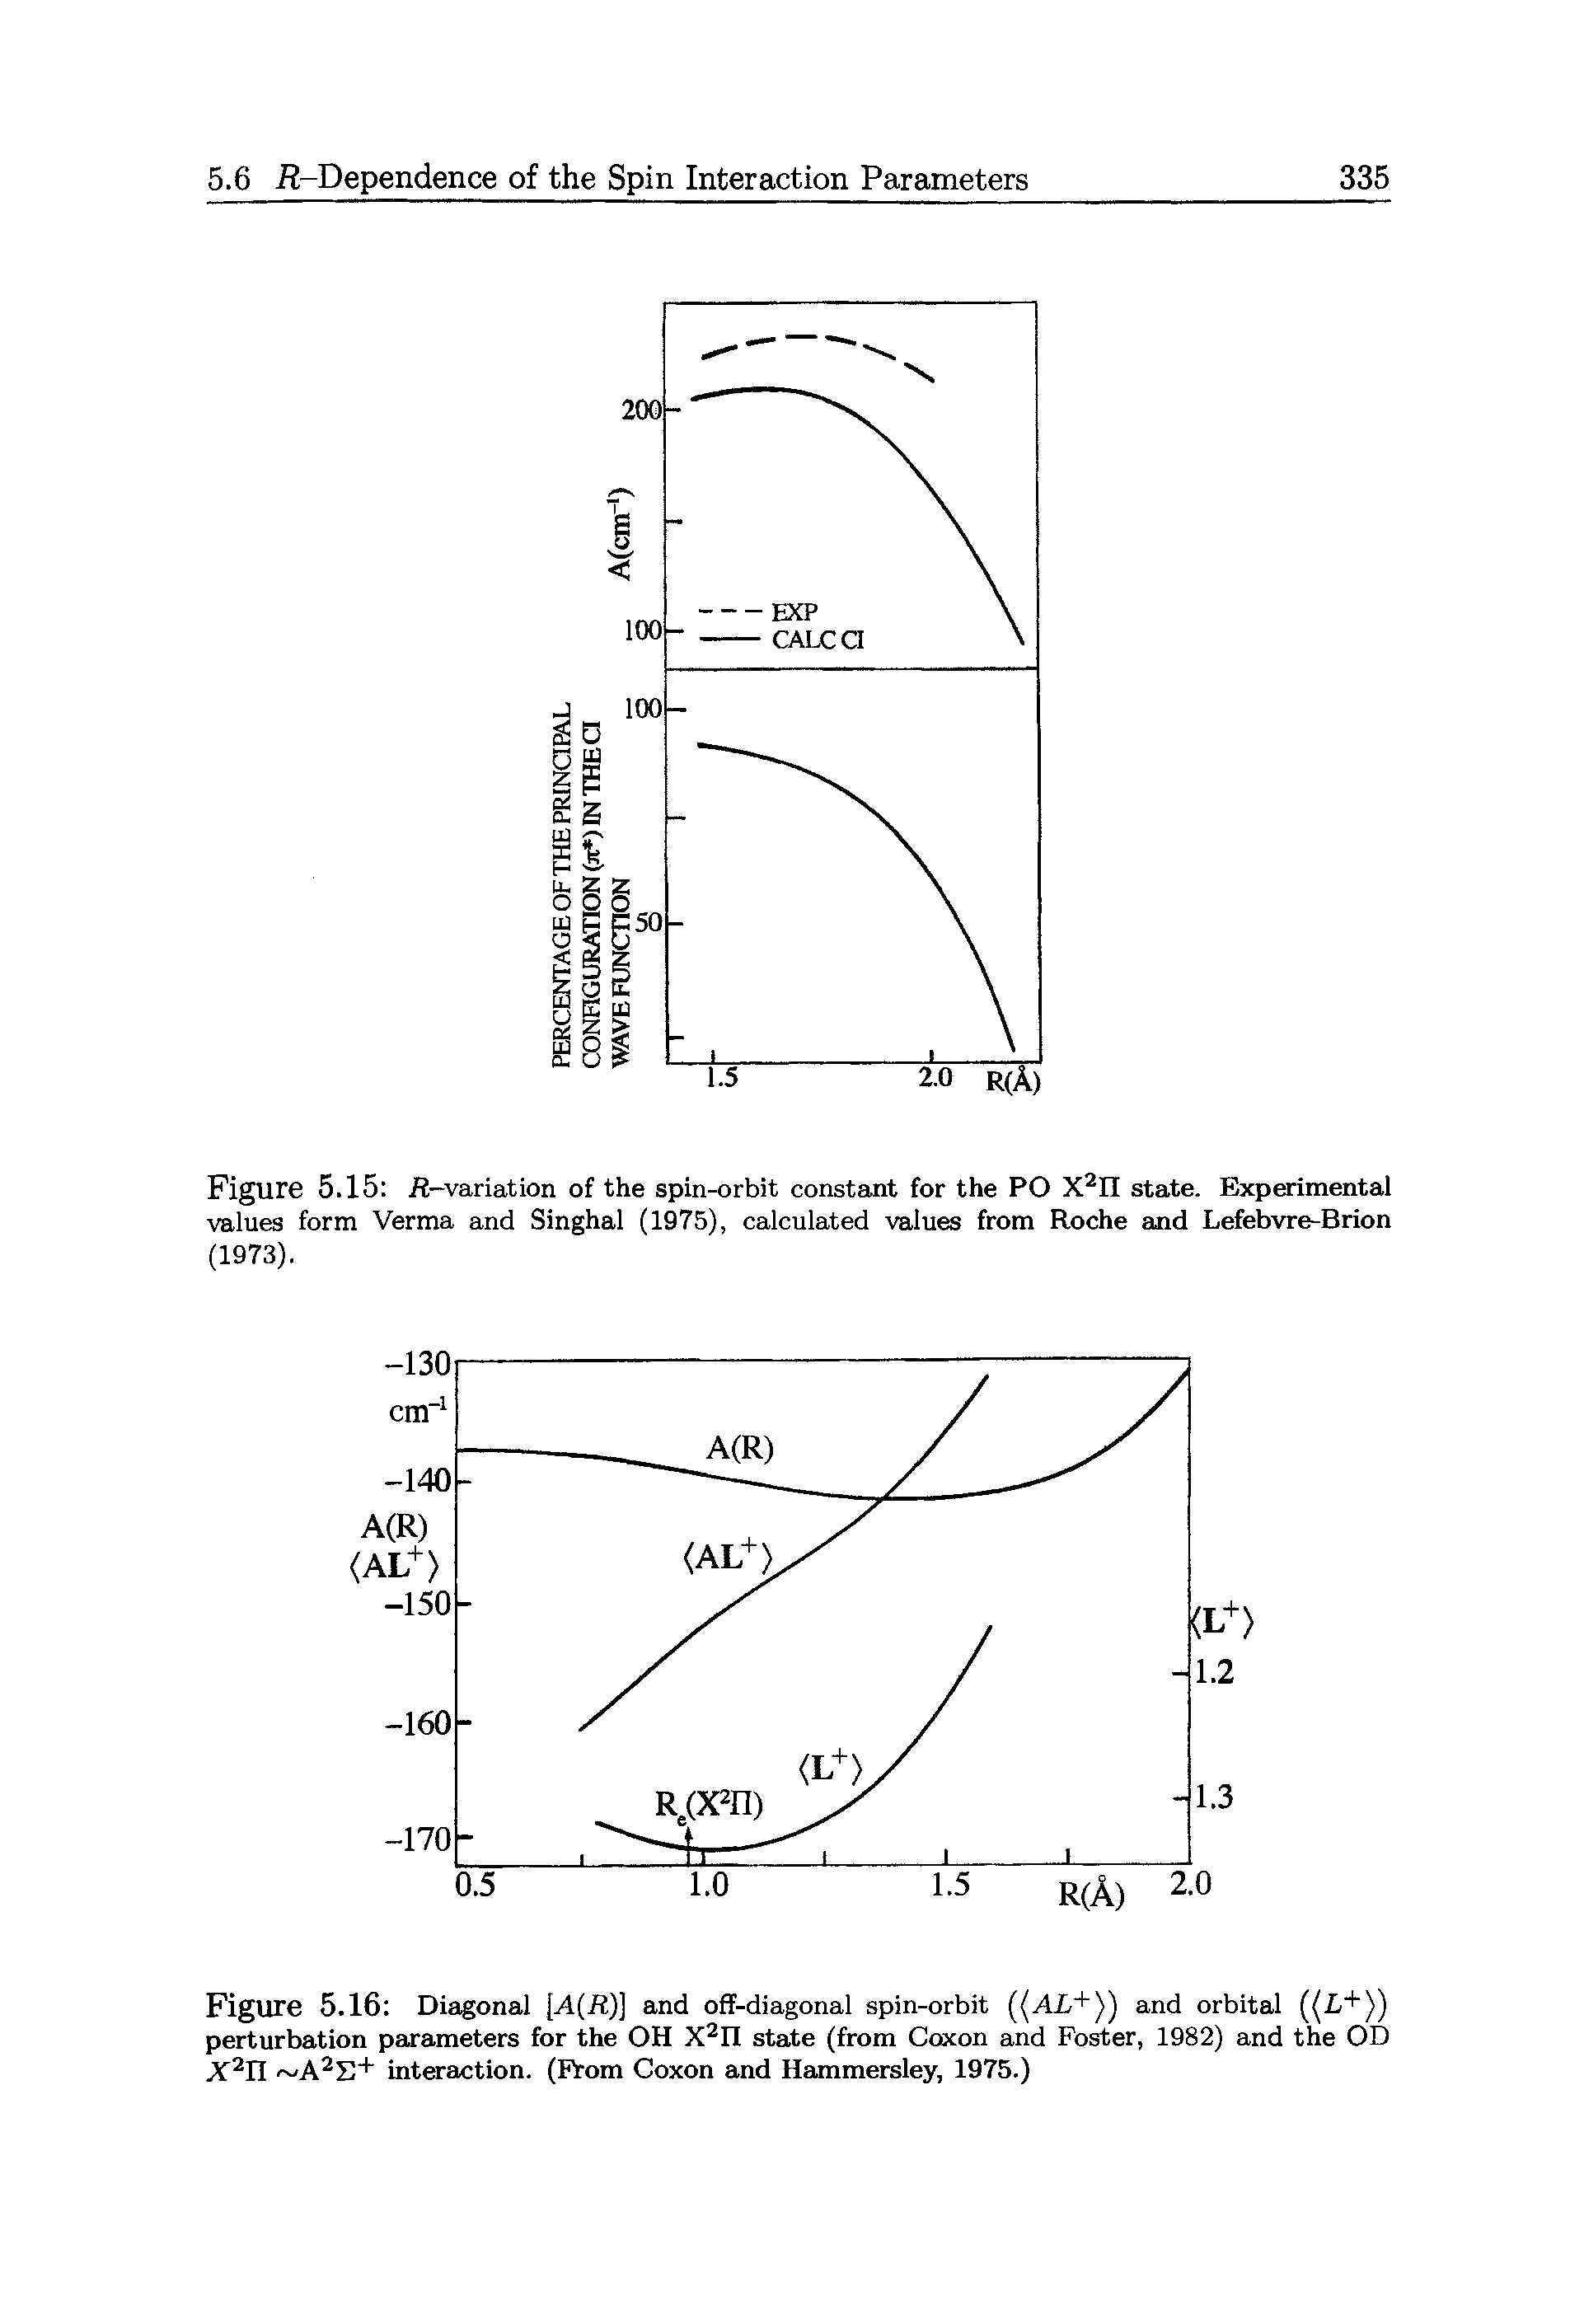 Figure 5.16 Diagonal [A(R)] and off-diagonal spin-orbit ((AL+)) and orbital ((L+)) perturbation parameters for the OH X2n state (from Coxon and Foster, 1982) and the OD X2n A2E+ interaction. (From Coxon and Hammersley, 1975.)...